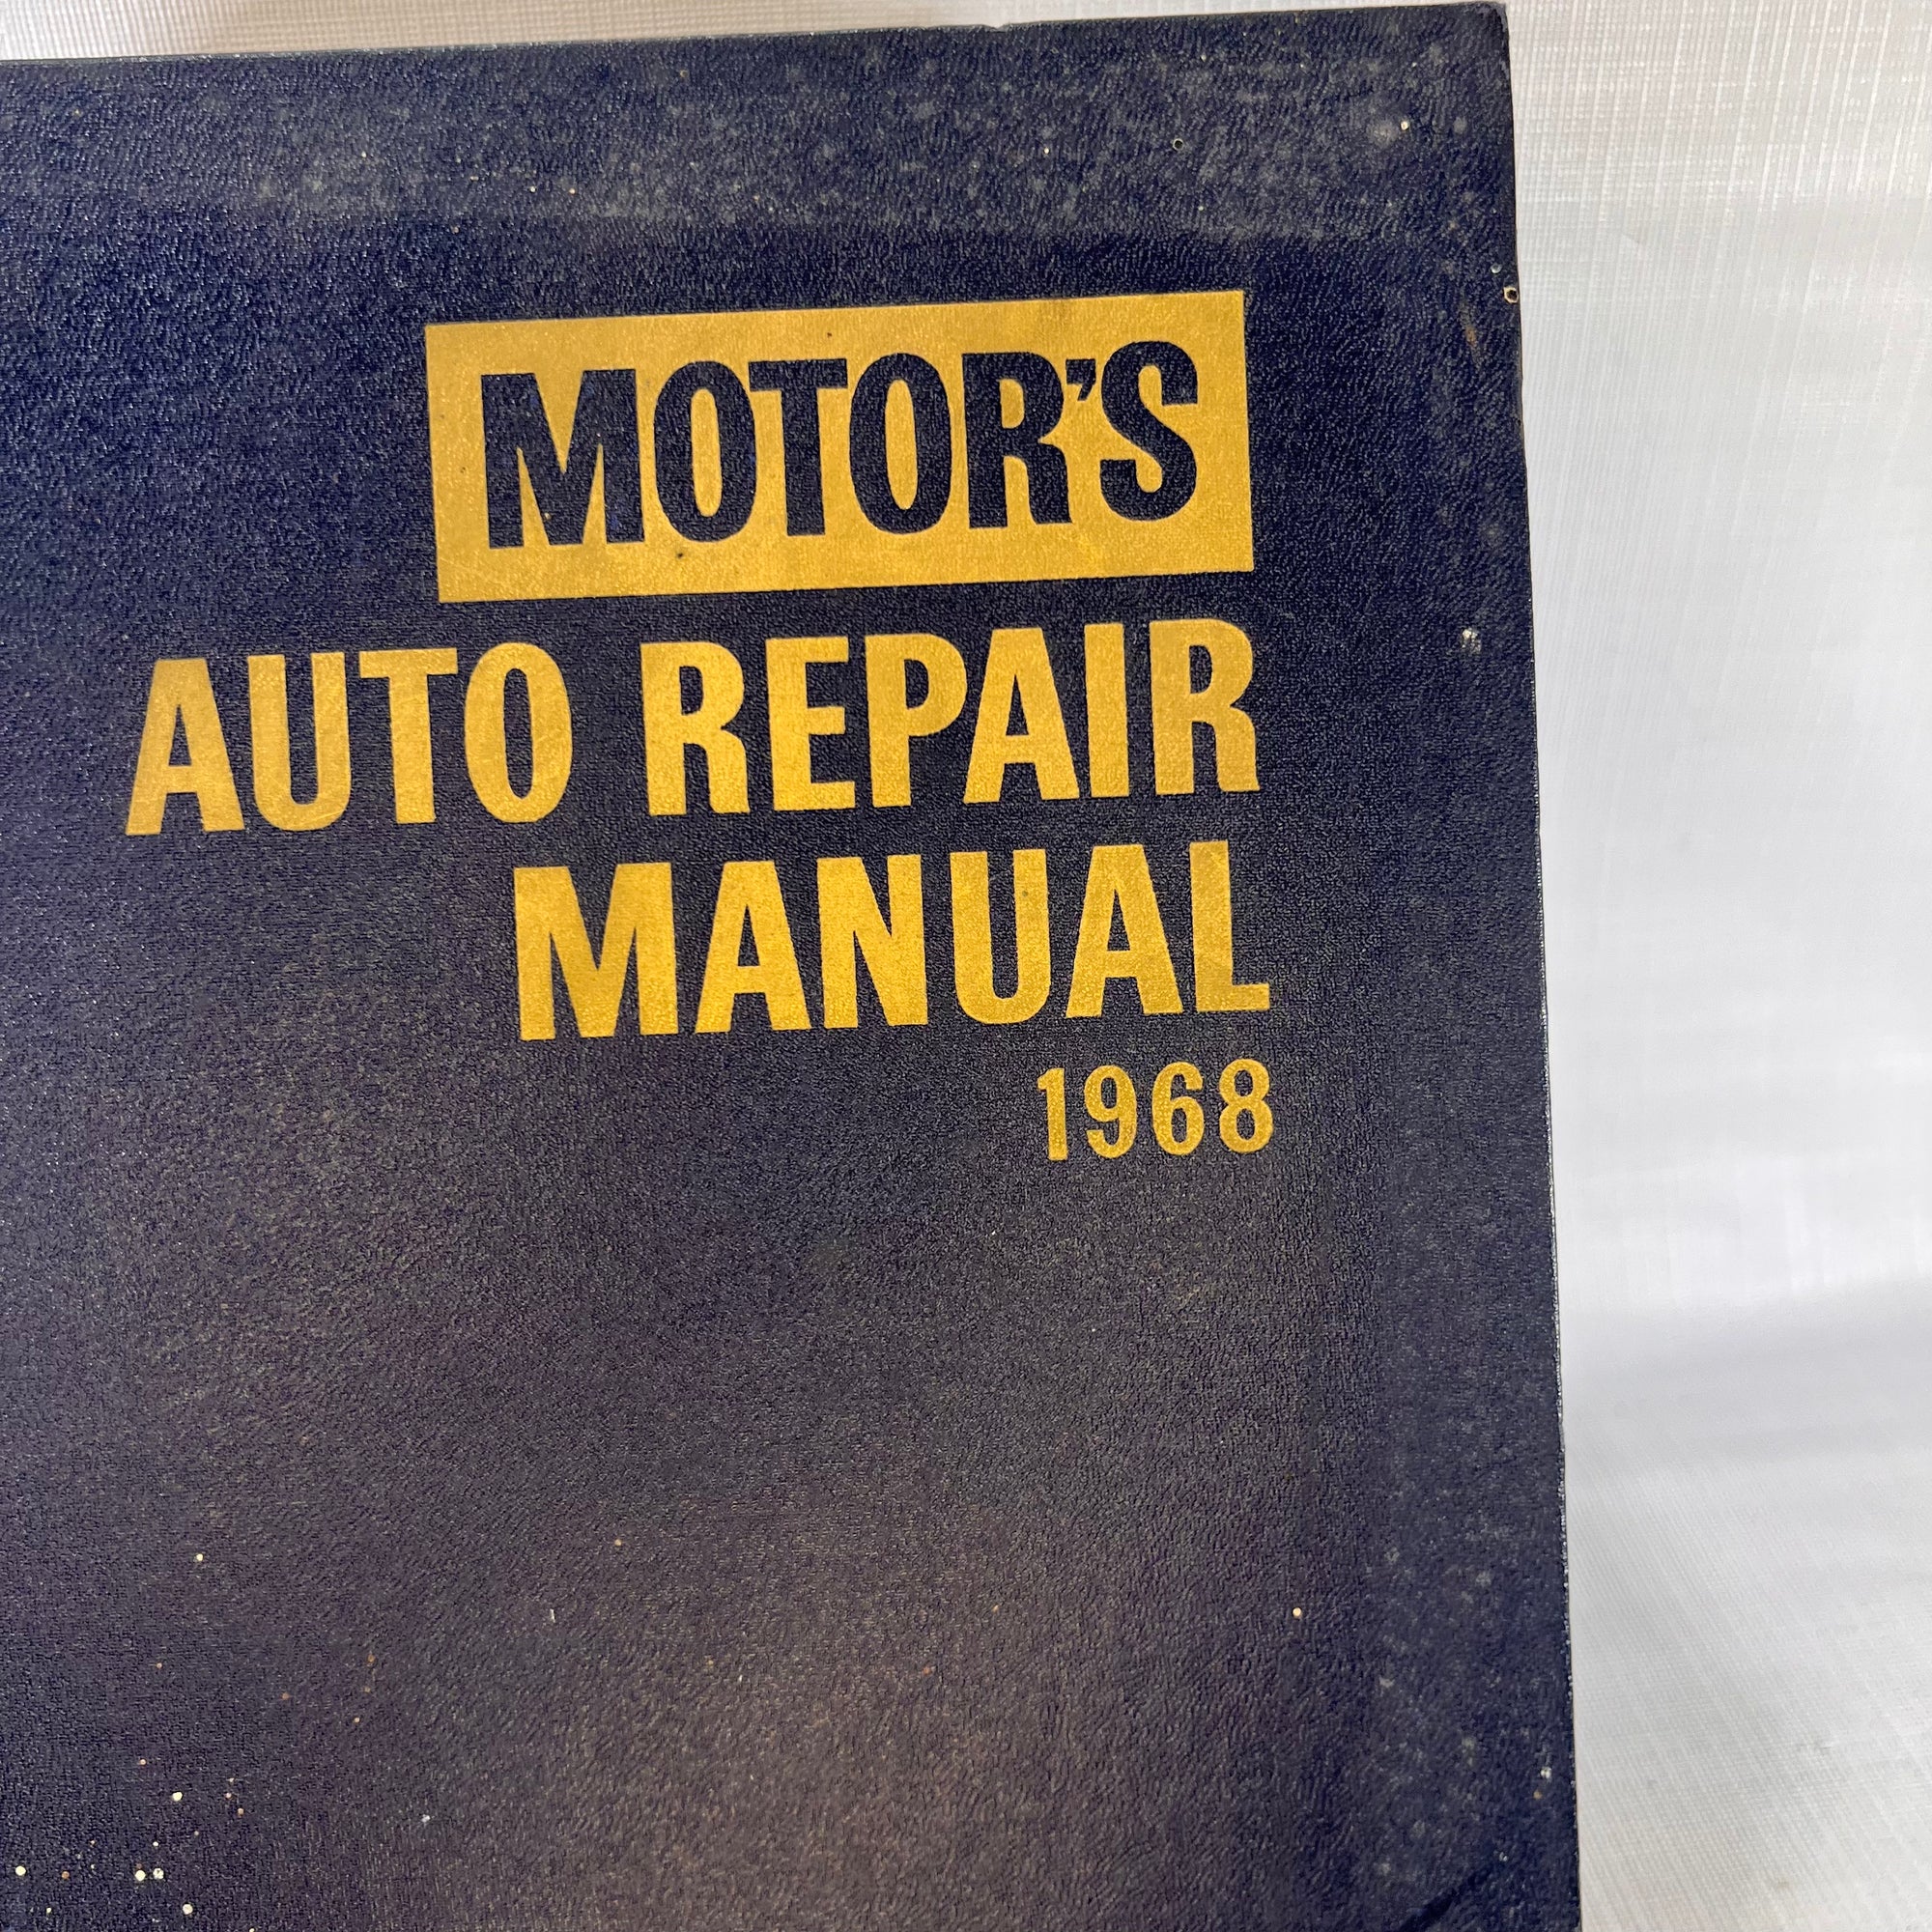 Motors Auto Repair Manual Thirty first Edition Fourth Printing 1968 Mechanical Specs and Service Procedures Hearst Corp